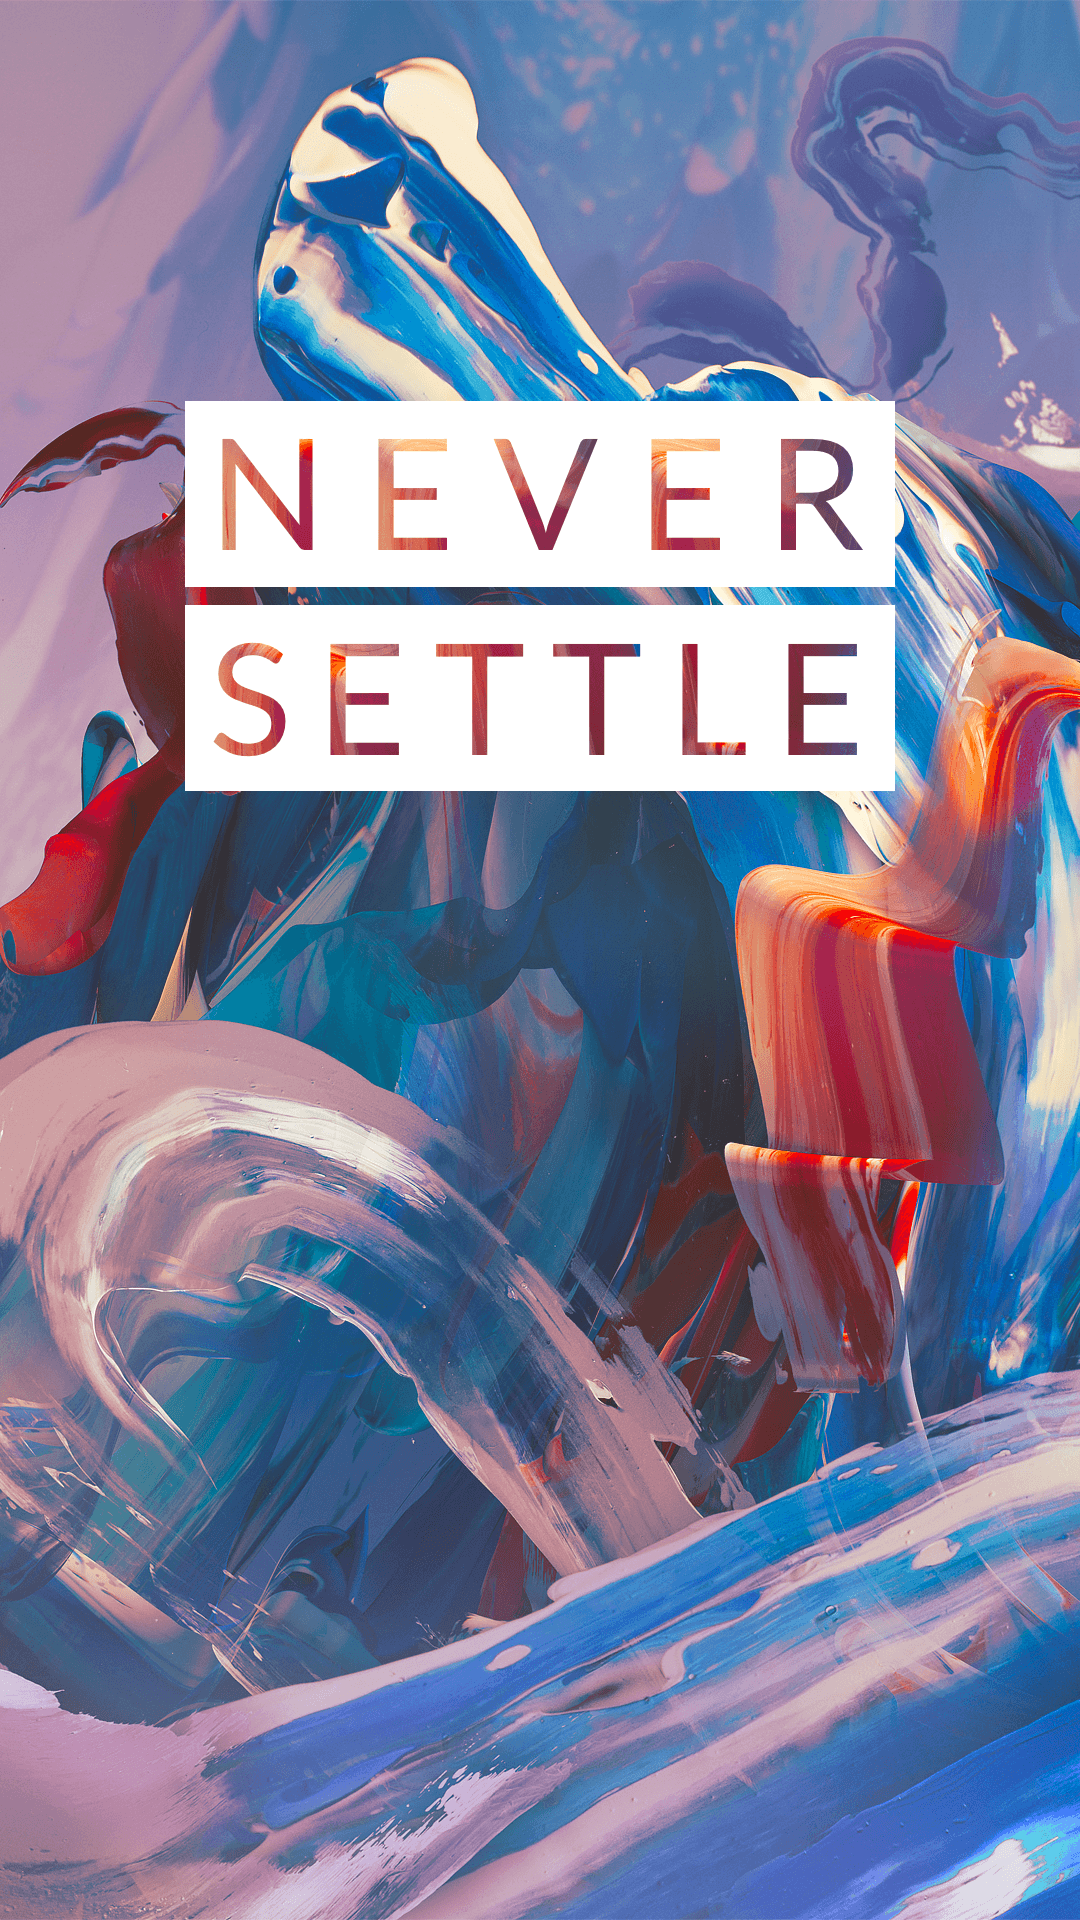 Never Settle Wallpapers - Wallpaper Cave